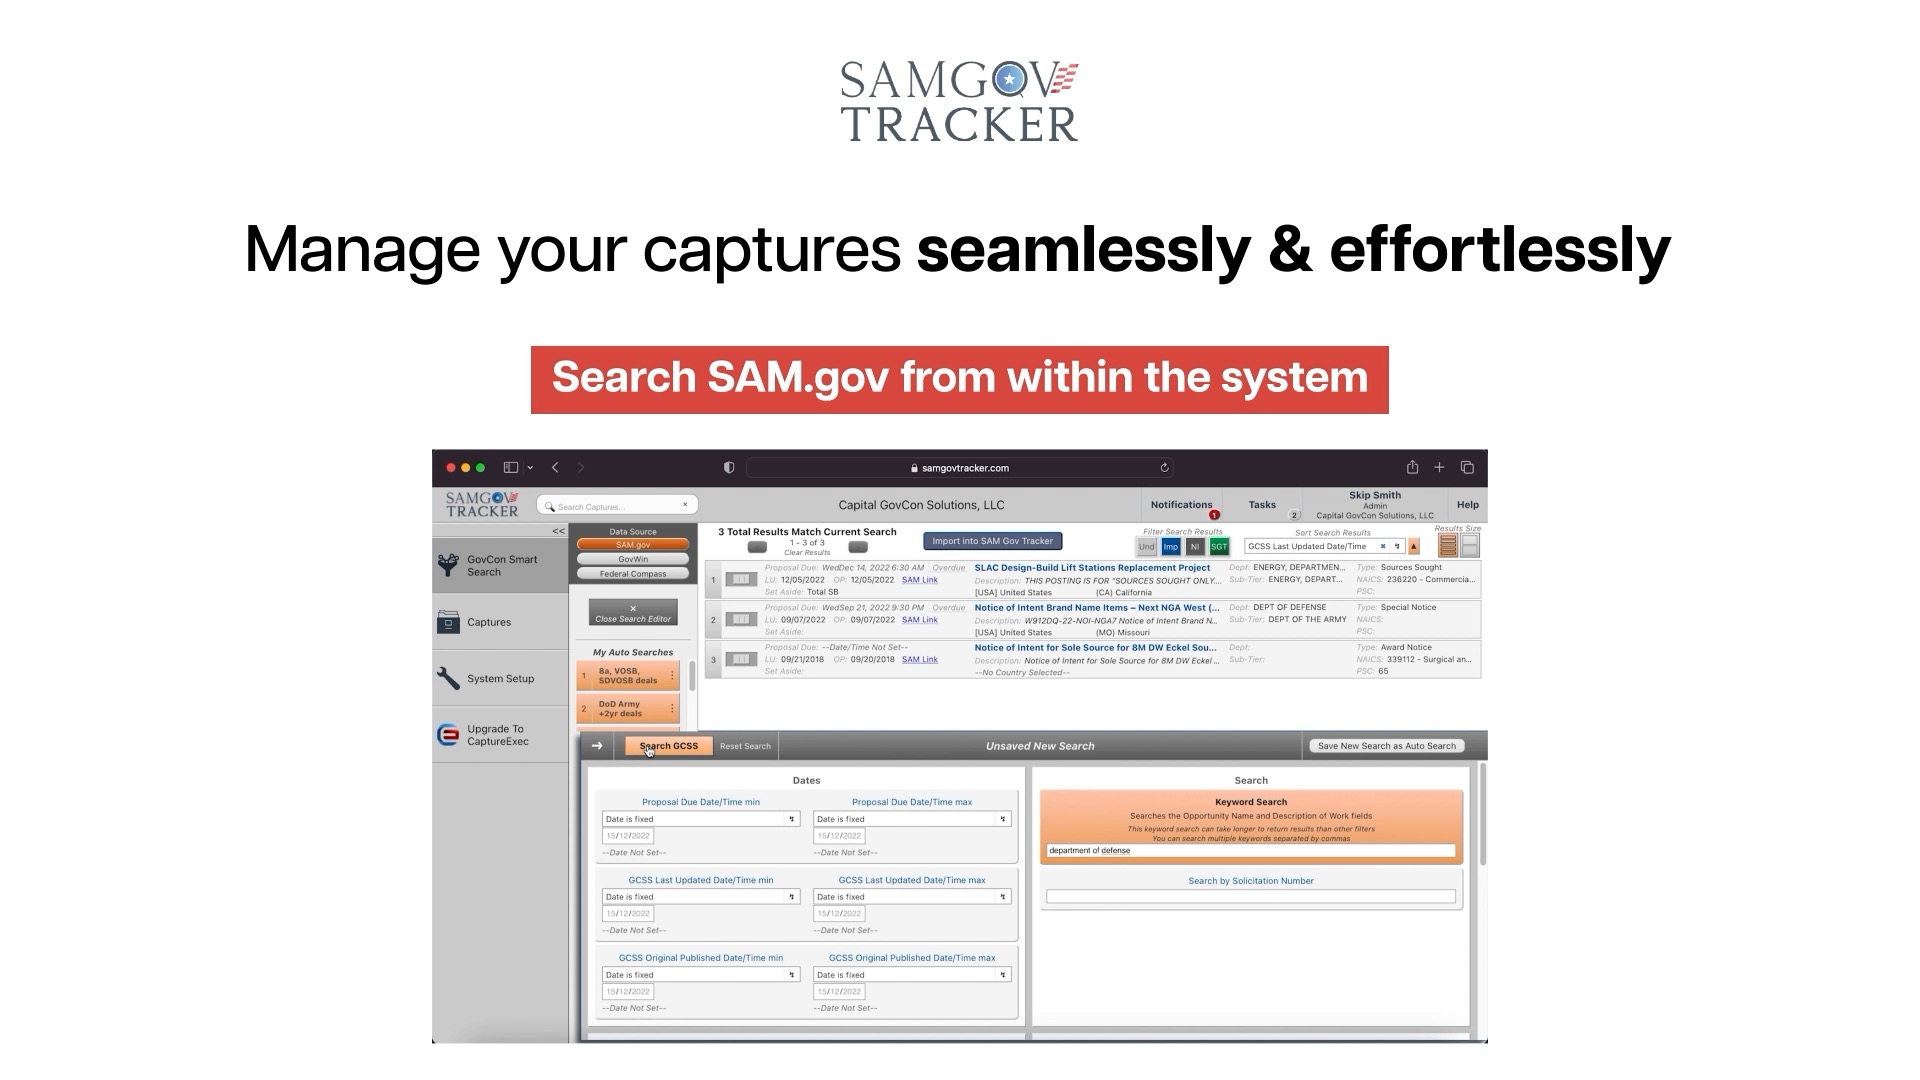 Manage your captures seamlessly and effortlessly